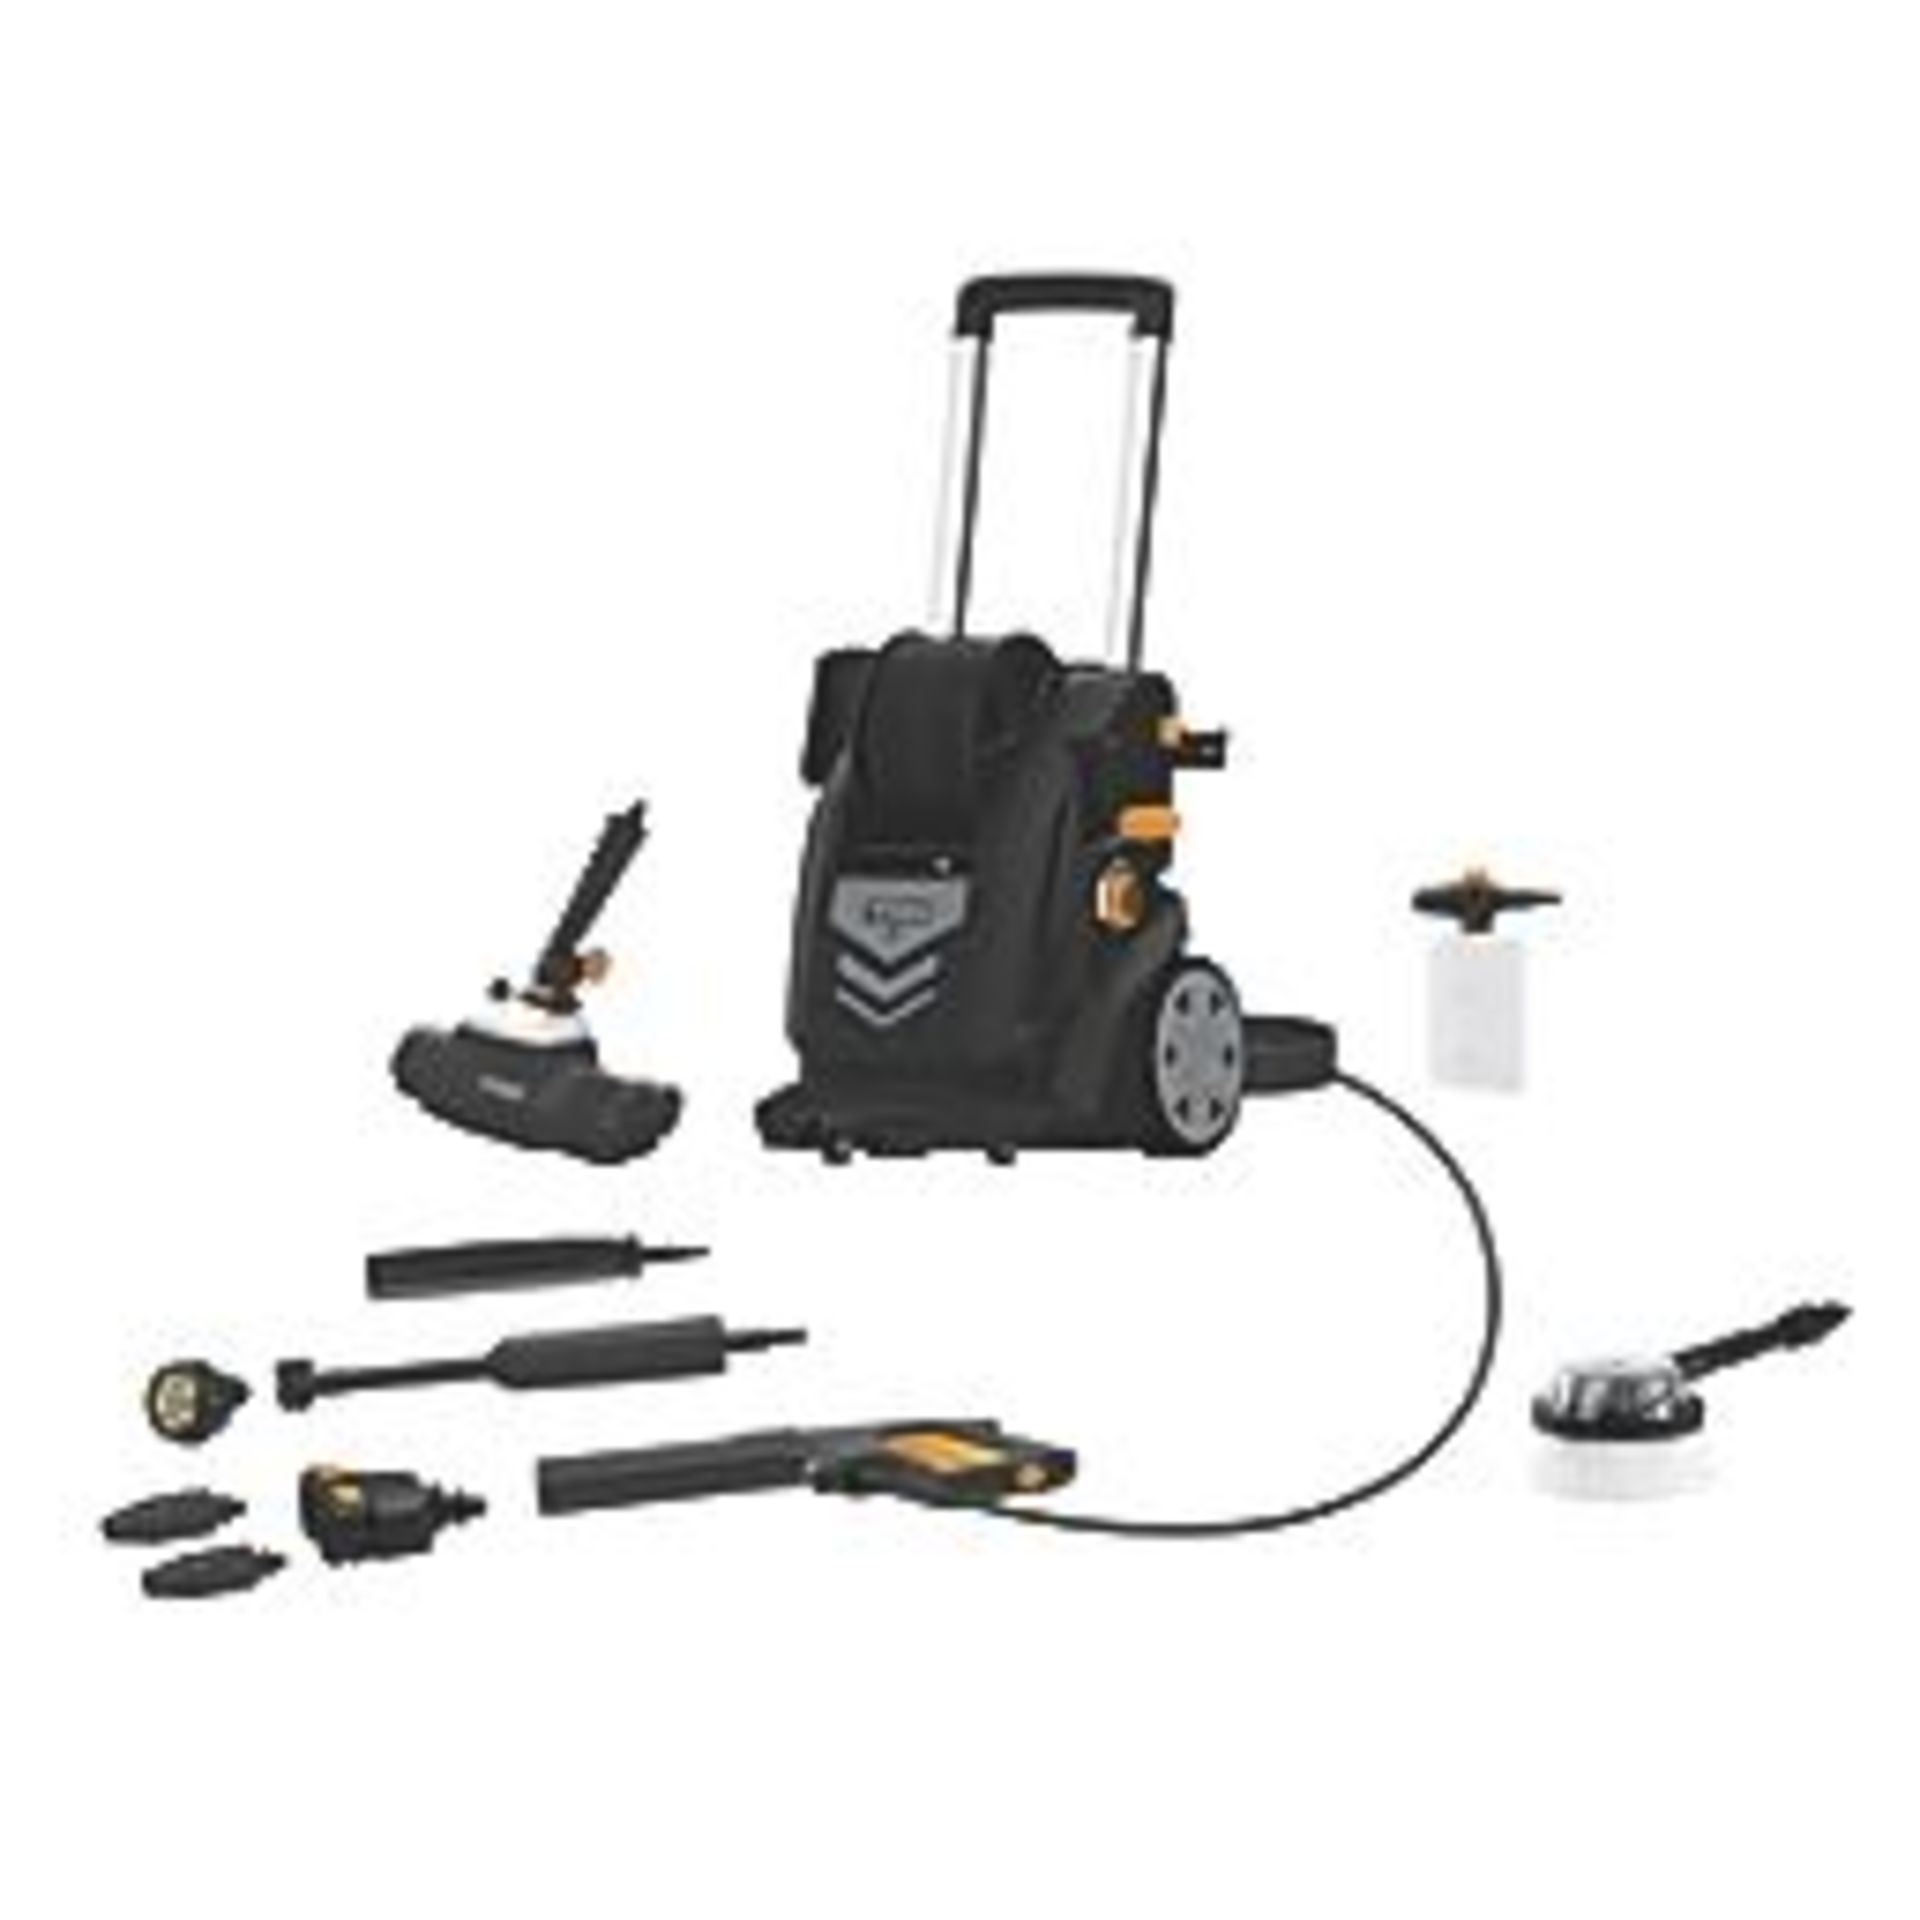 TITAN 155BAR ELECTRIC HIGH PRESSURE WASHER 2.7KW 230V. - R14.15. Easy to manoeuvre pressure washer